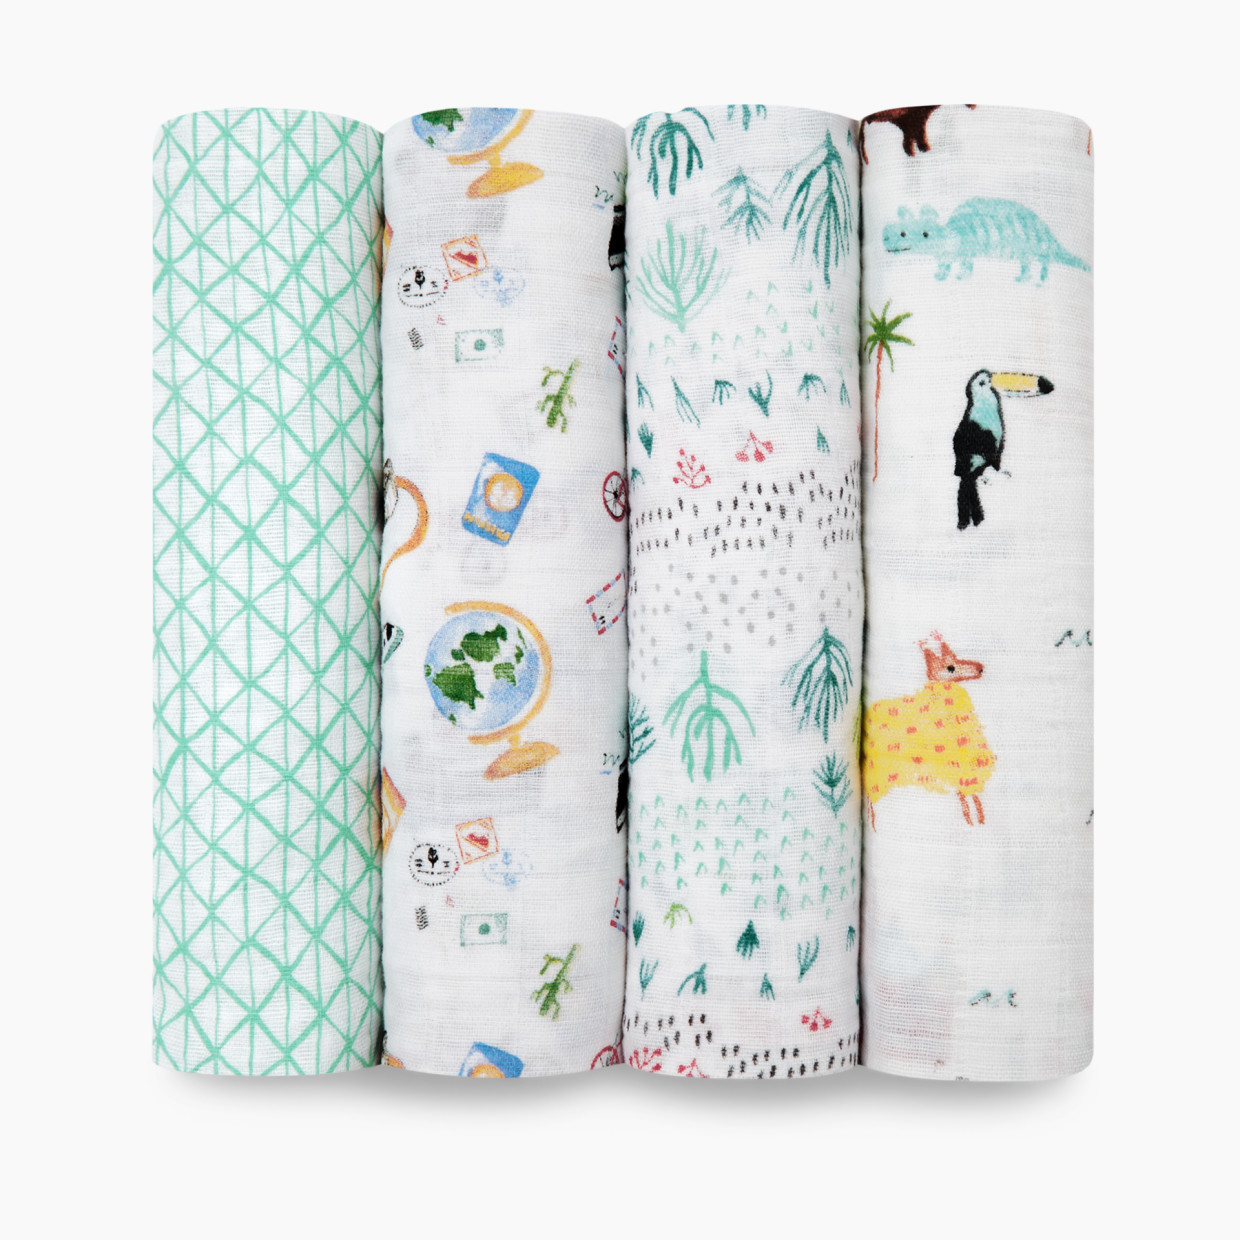 Aden + Anais Cotton Muslin Swaddle 4-Pack - Around The World.